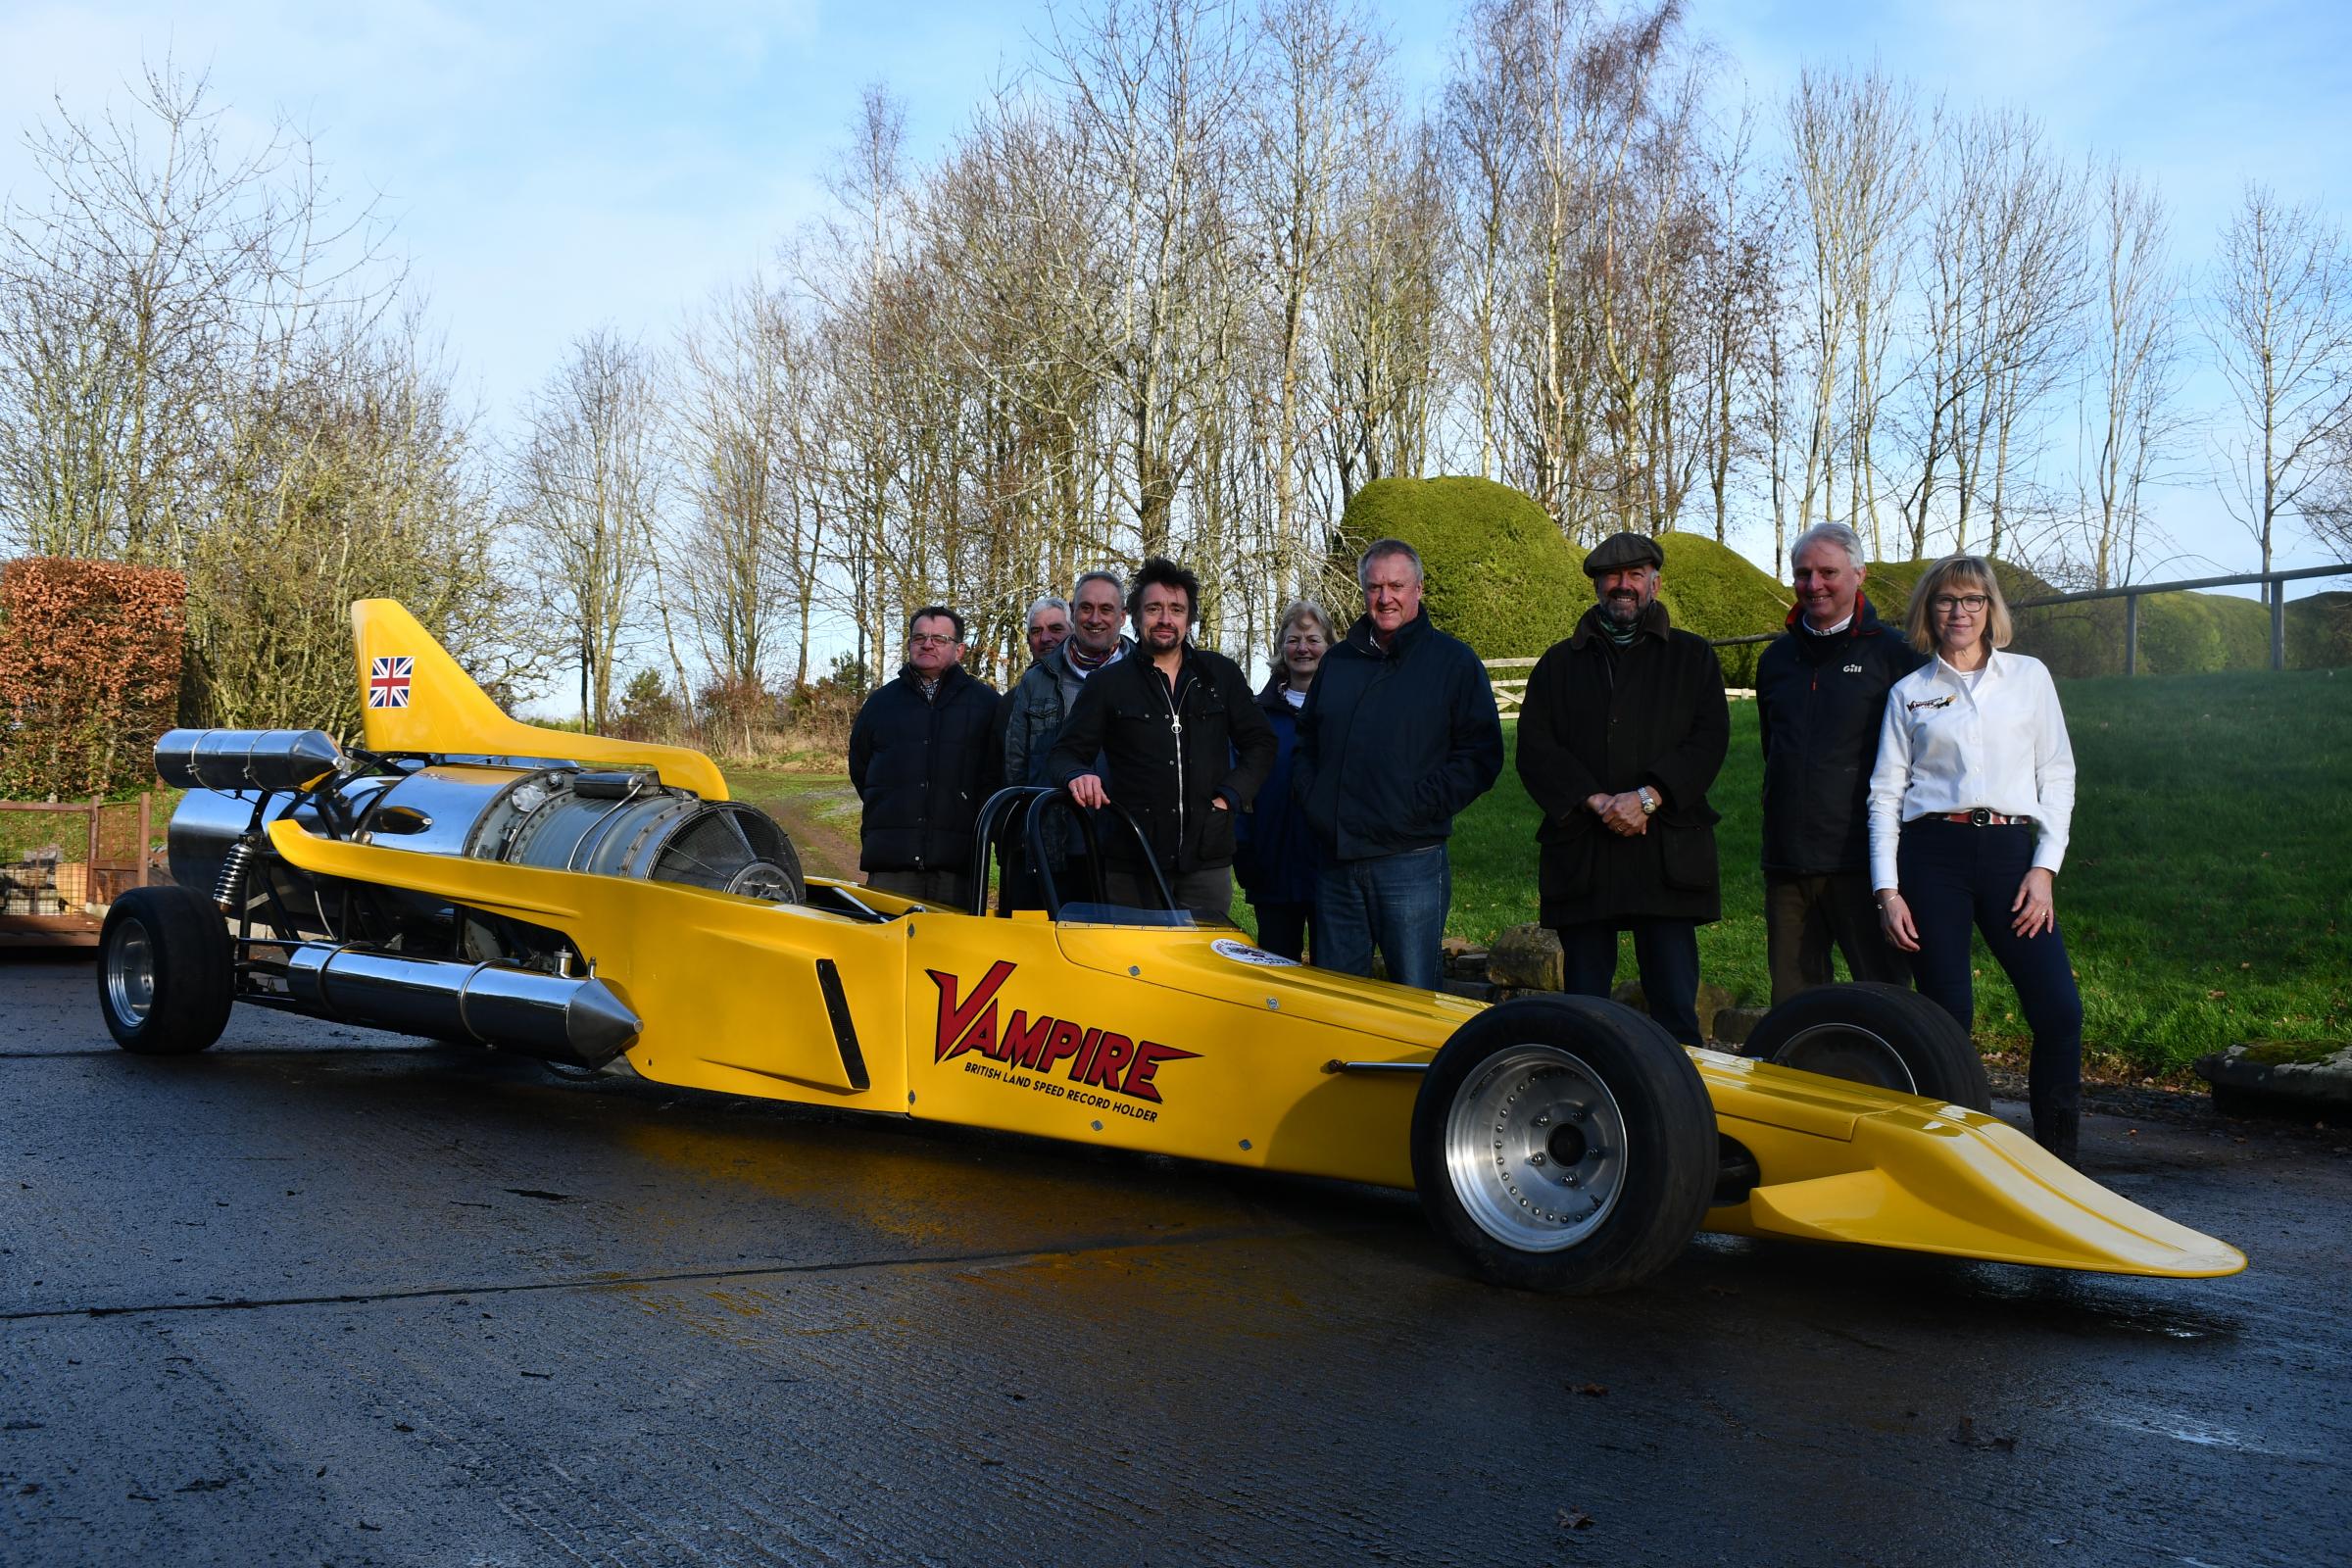 The Syndicate behind the record-breaking Vampire jet car with Richard Hammond